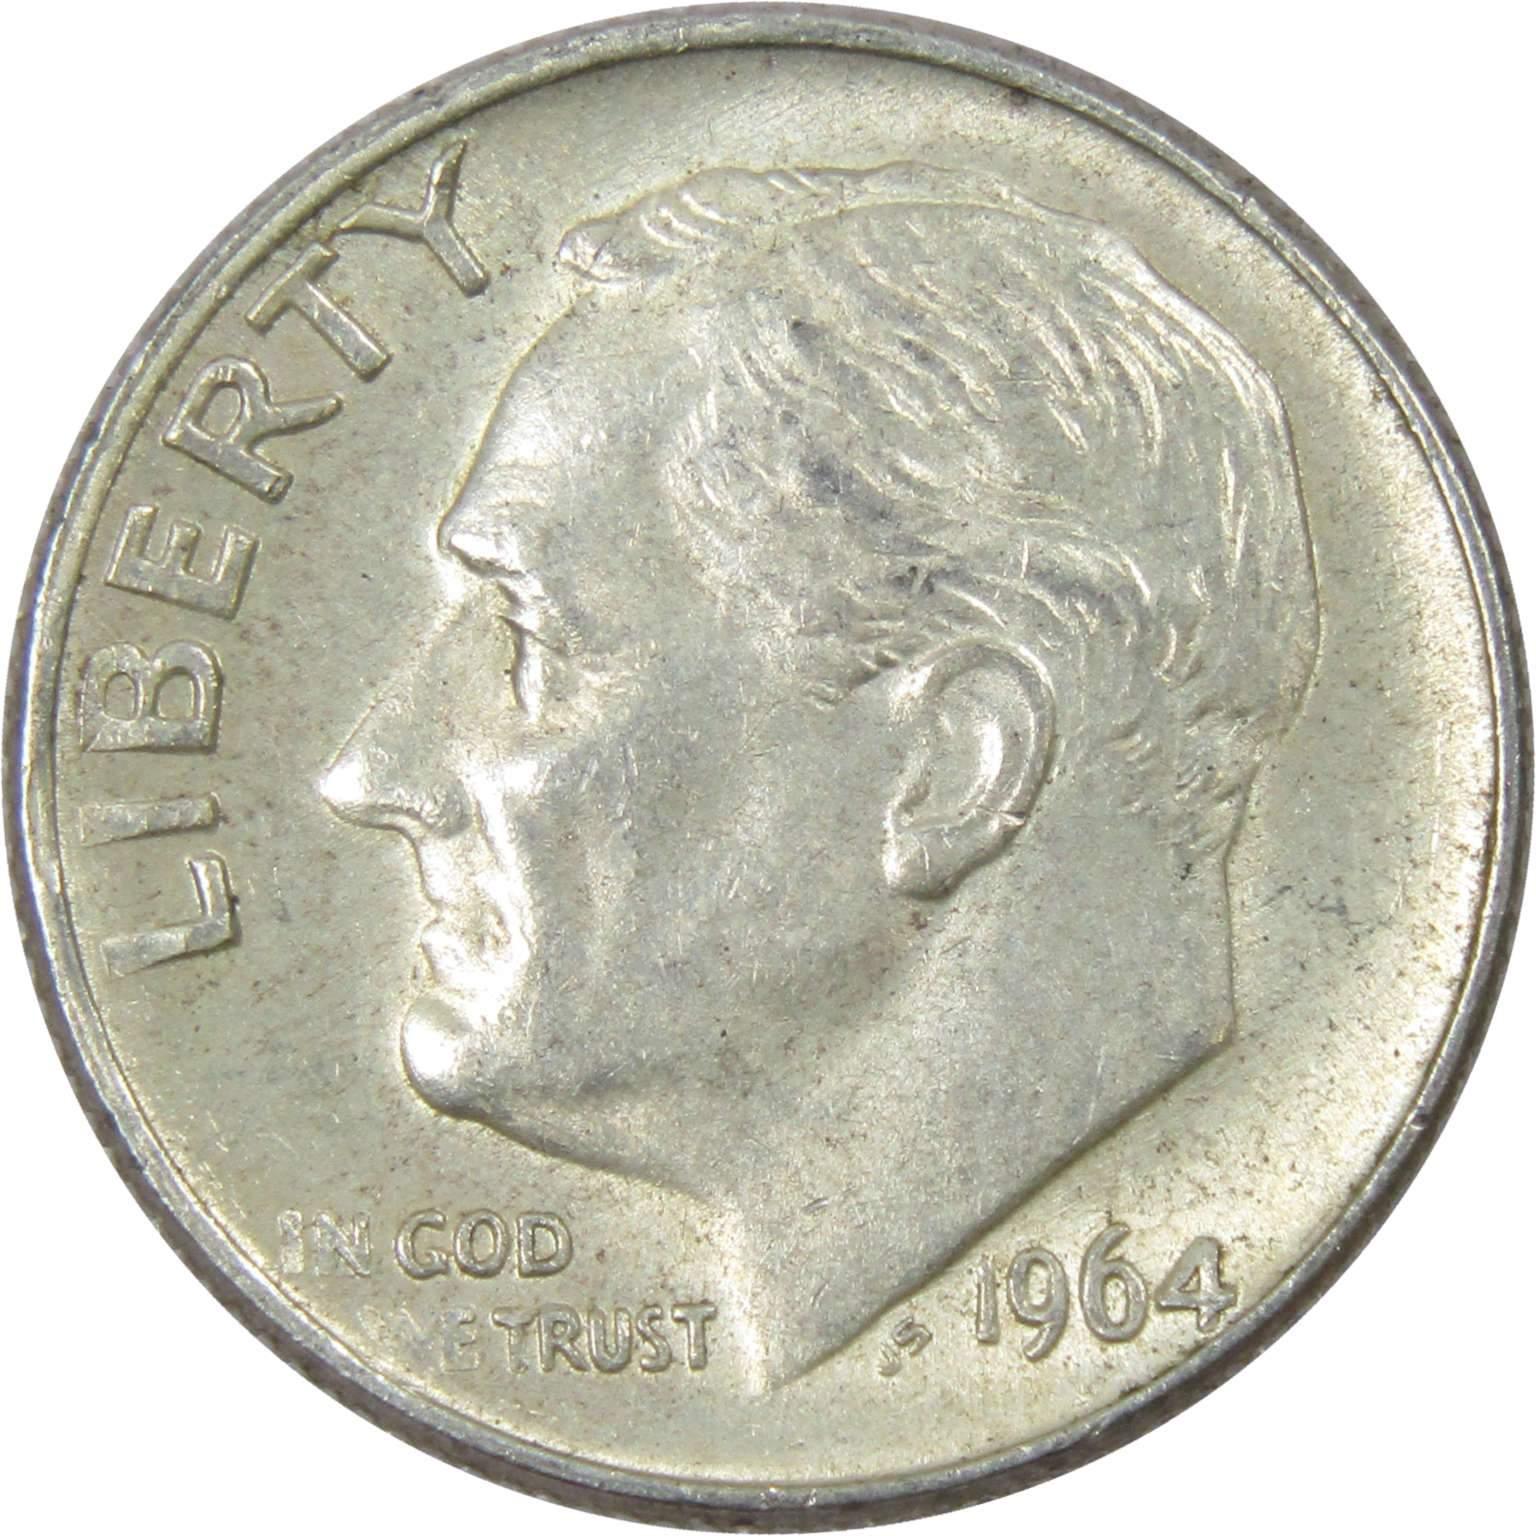 1964 D Roosevelt Dime AG About Good 90% Silver 10c US Coin Collectible